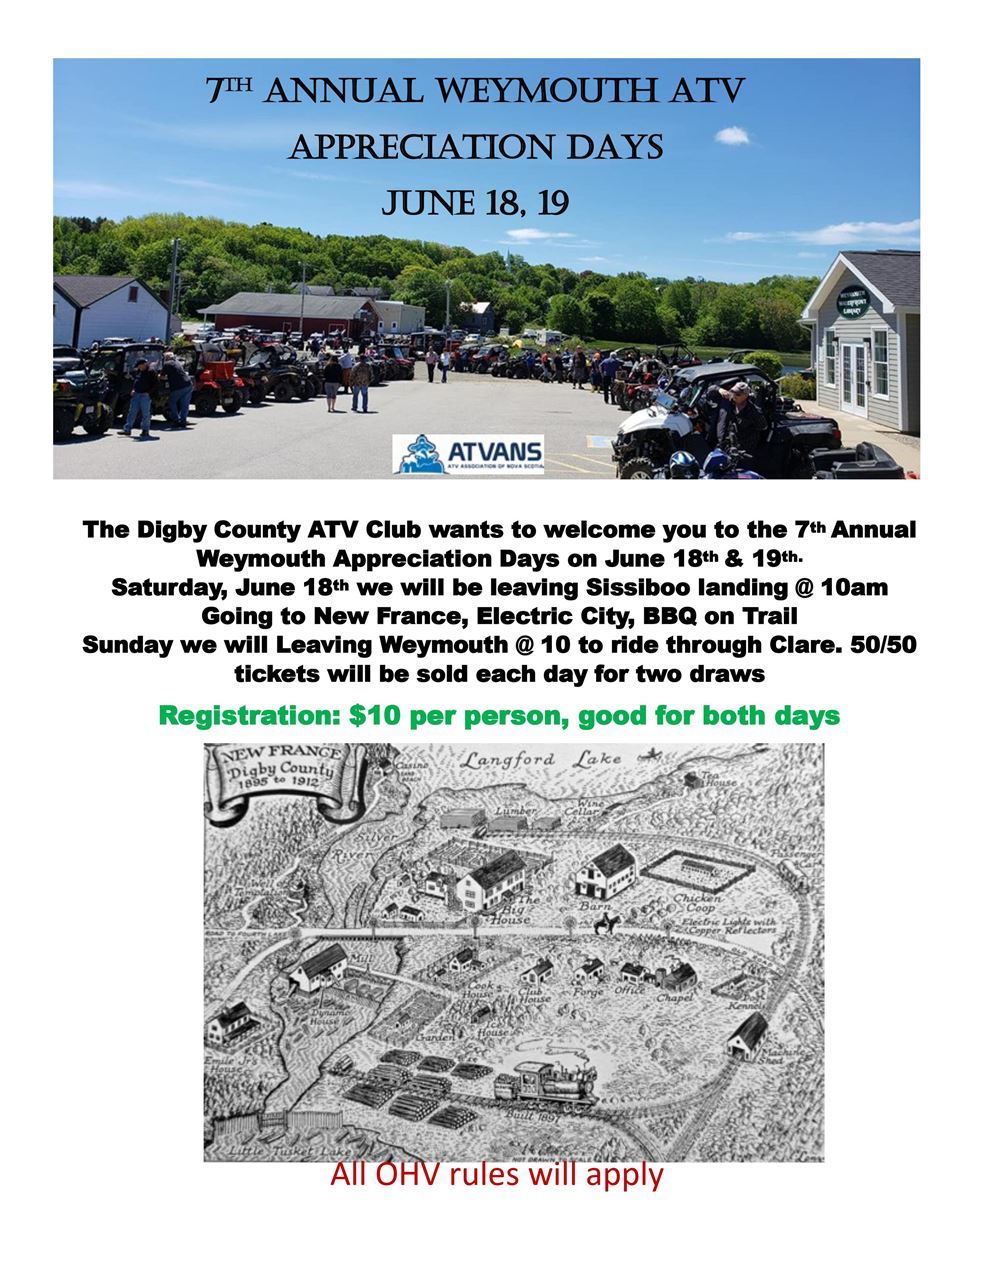 Weymouth ATV Appreciation Days, June 18th and 19th. Saturday leaving Sissiboo Landing at 10am going to New France, Electric City. Sunday leaving Weymouth riding through Clare. 50/50 draw each day. Registration $10 good for both days.